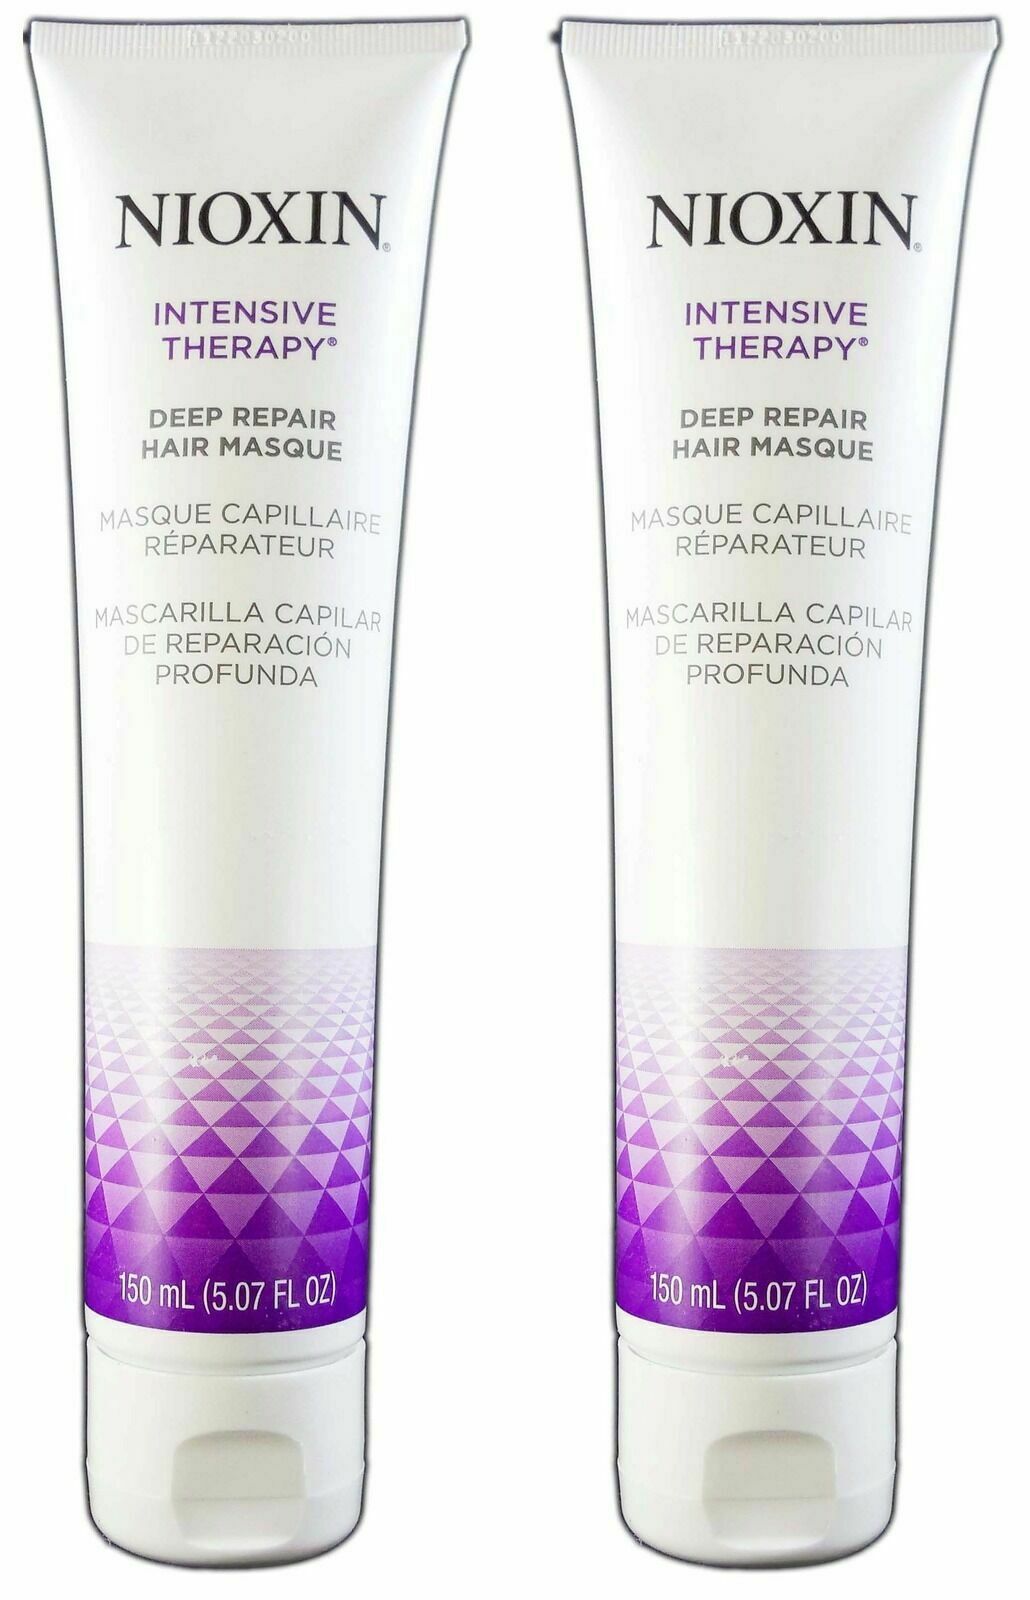 NIOXIN Intensive Therapy for Deep Repair Hair Masque 5.1 oz (Pack of 2) - $18.99